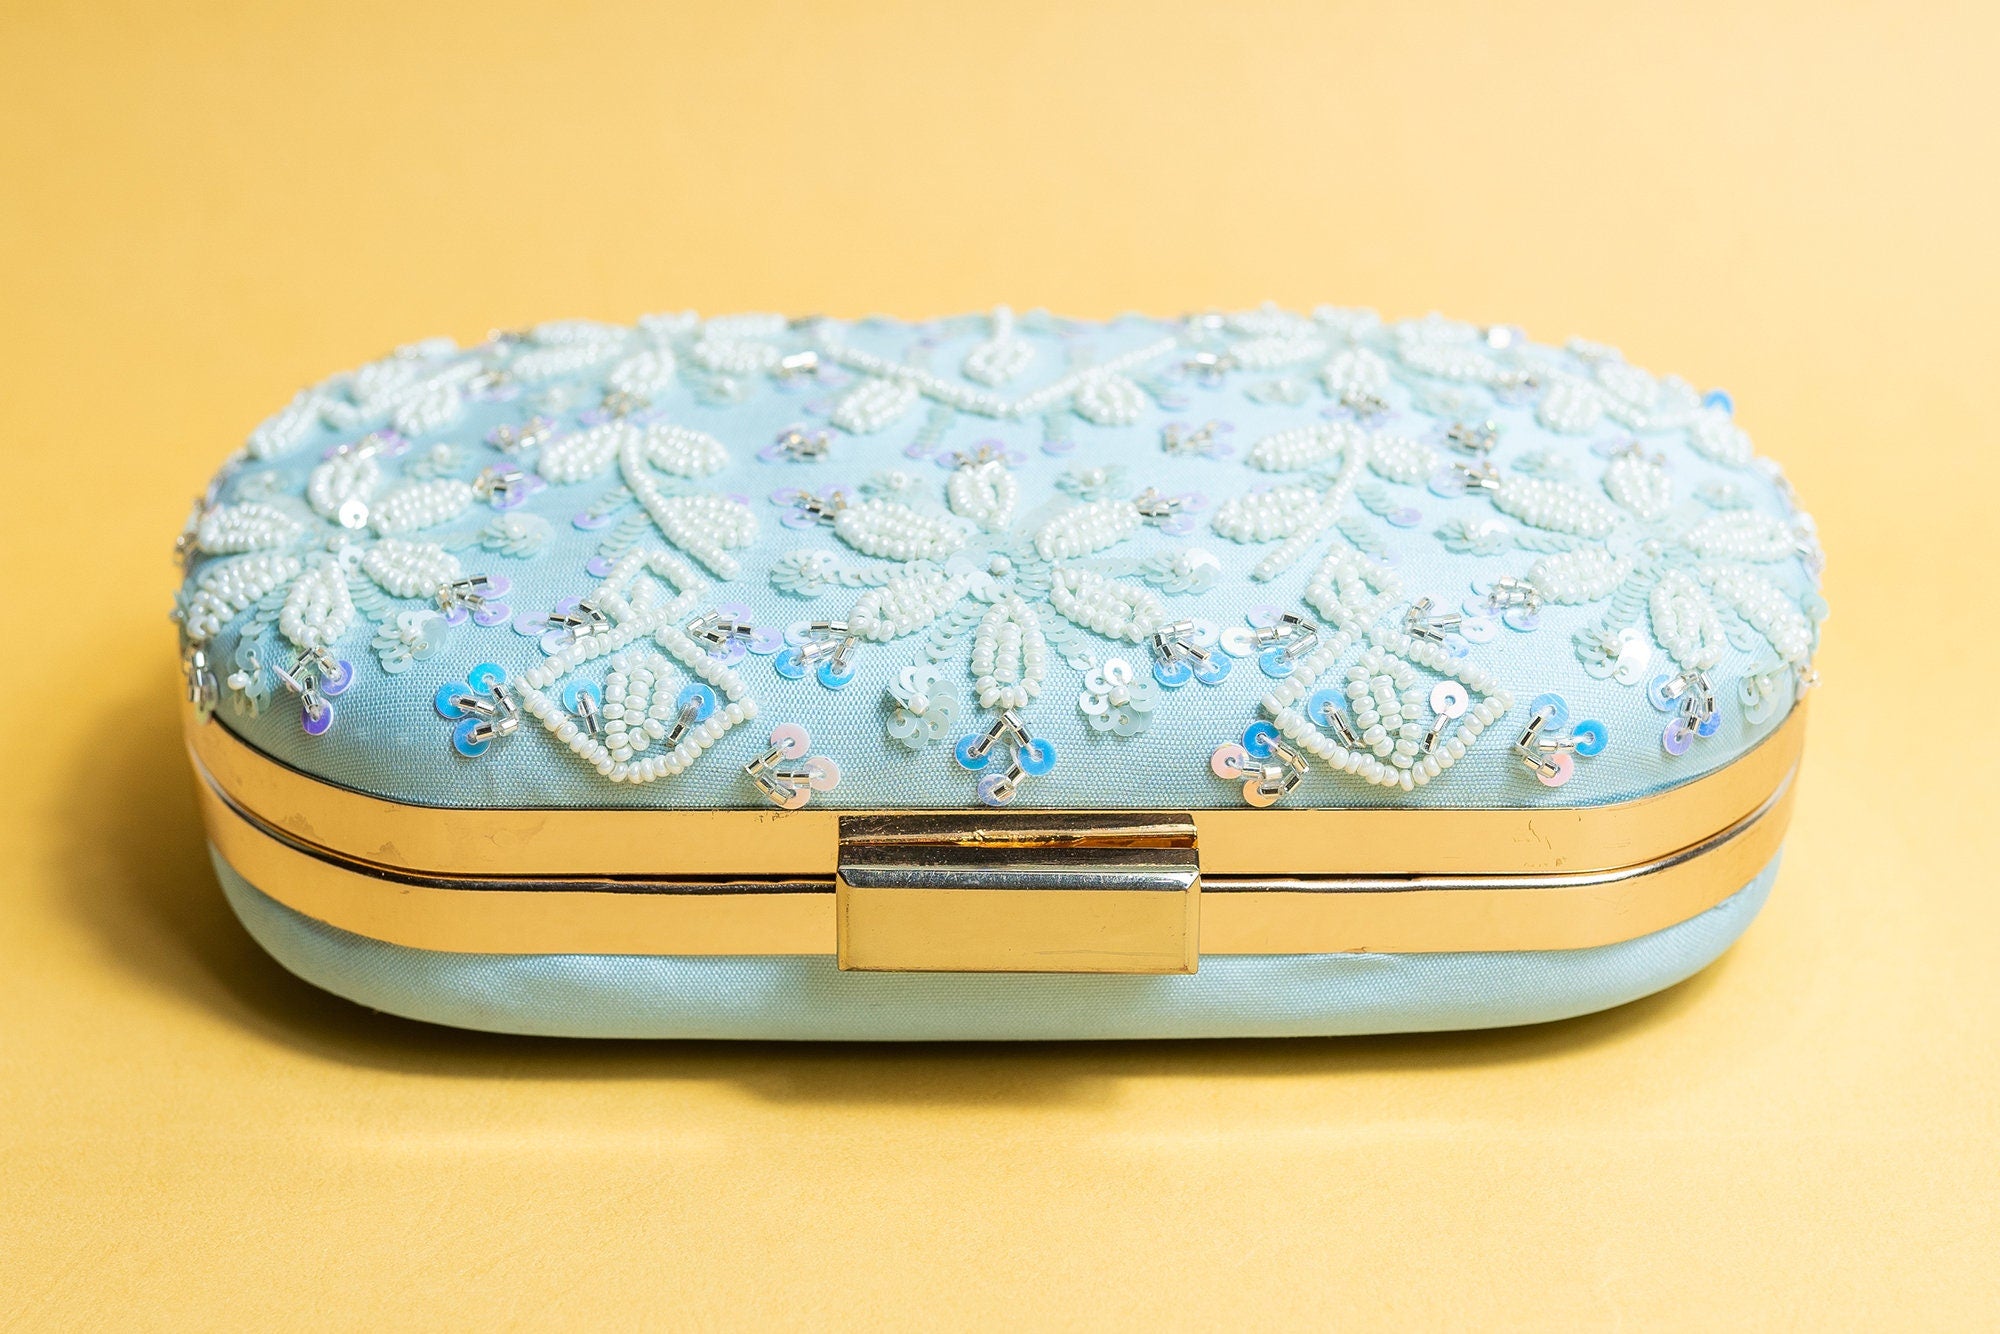 Light Blue silk clutch purse/bag, hand made embroidery clutch bag with detachable metal sling